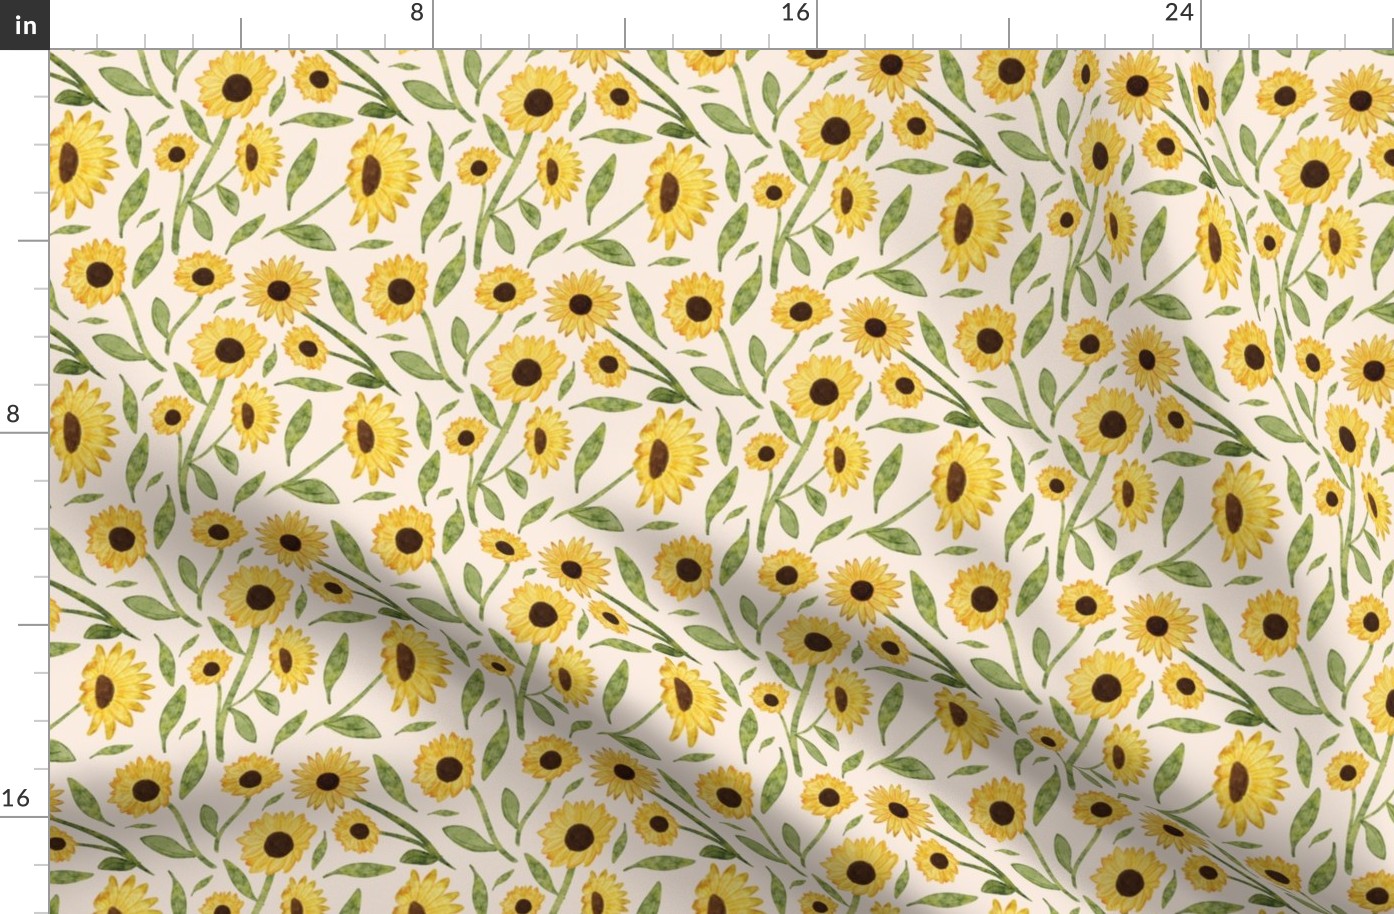 Watercolor Sunflower Garden off white scattered [38] by Norlie Studio